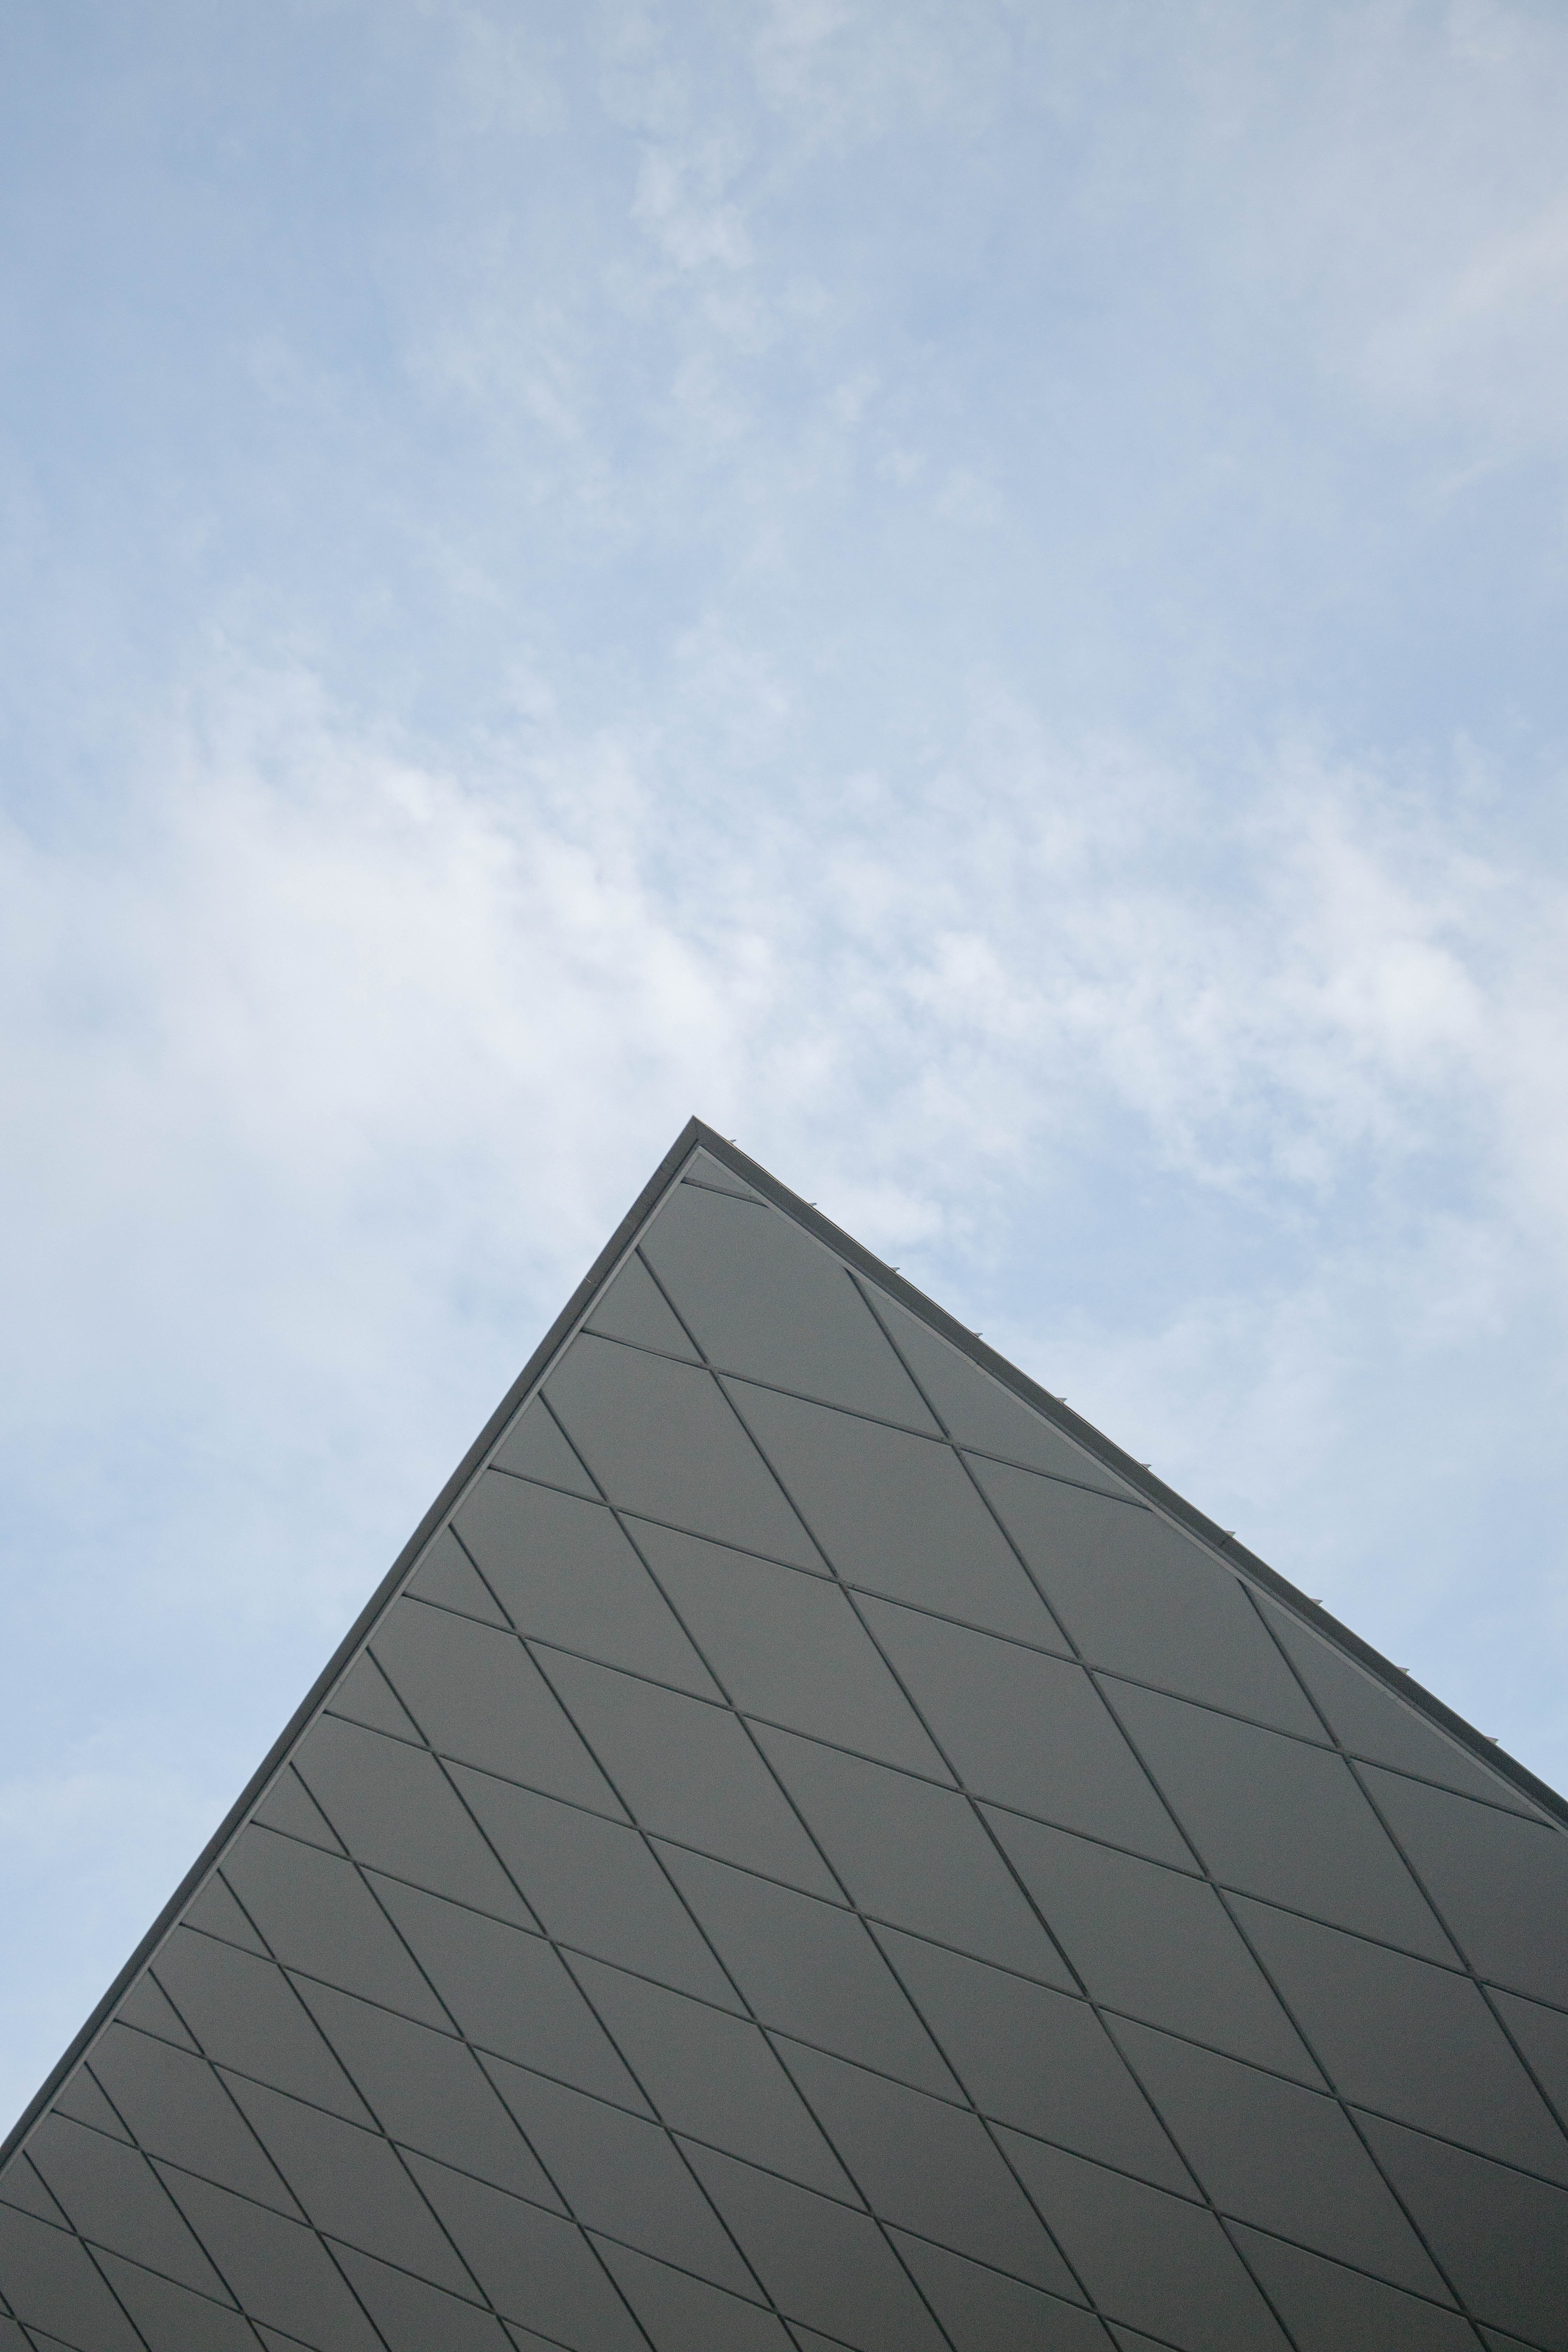 74685 download wallpaper sky, minimalism, angle, corner, pyramid screensavers and pictures for free